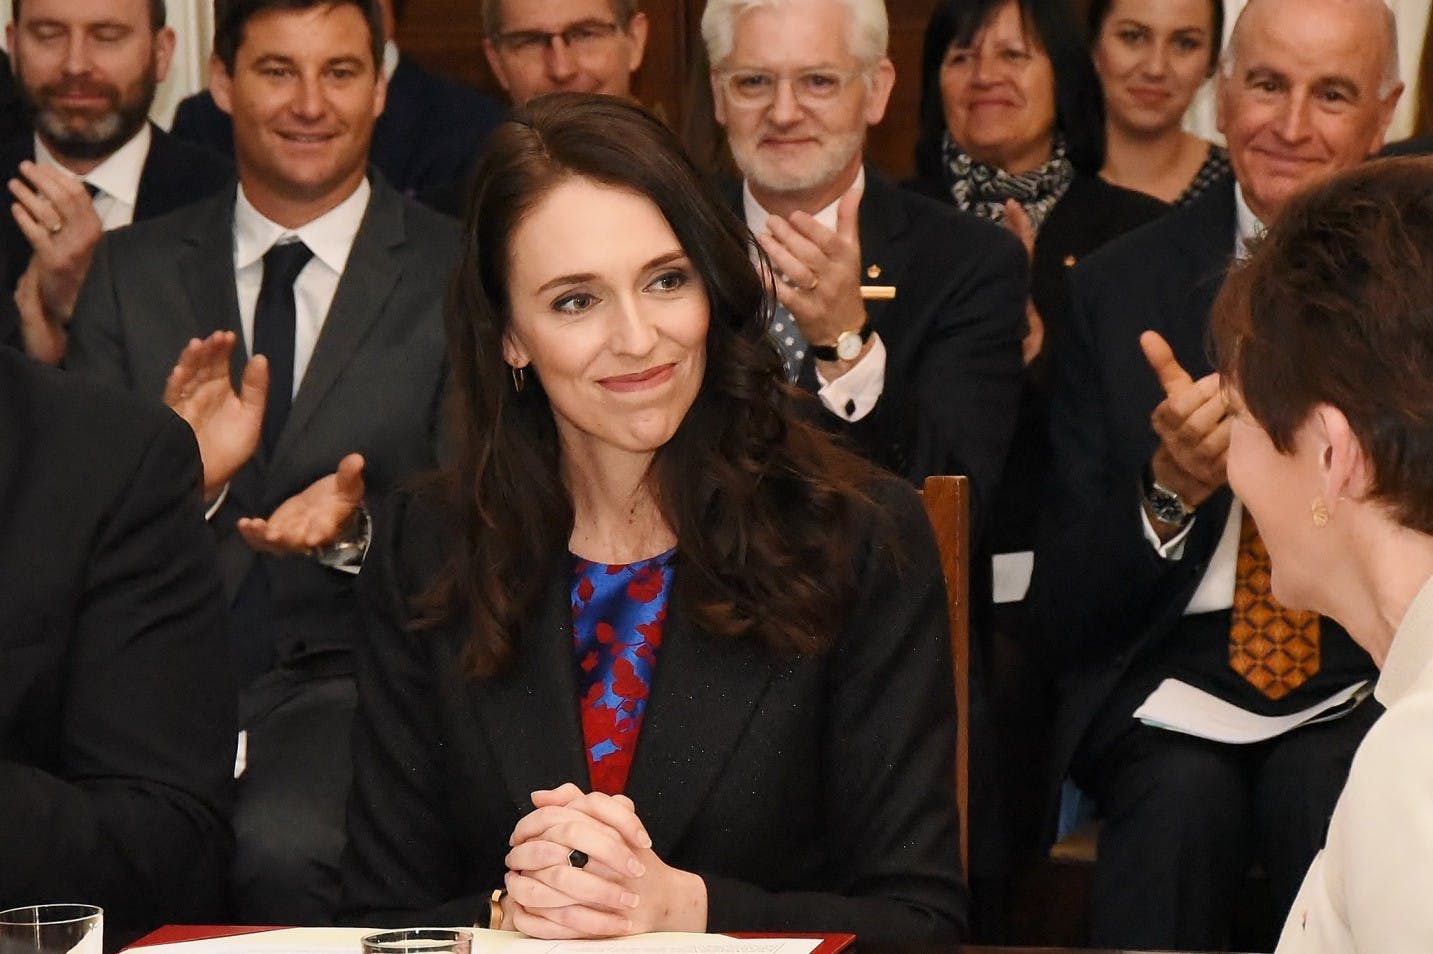 Jacinda Ardern Resigns as New Zealand’s Prime Minister